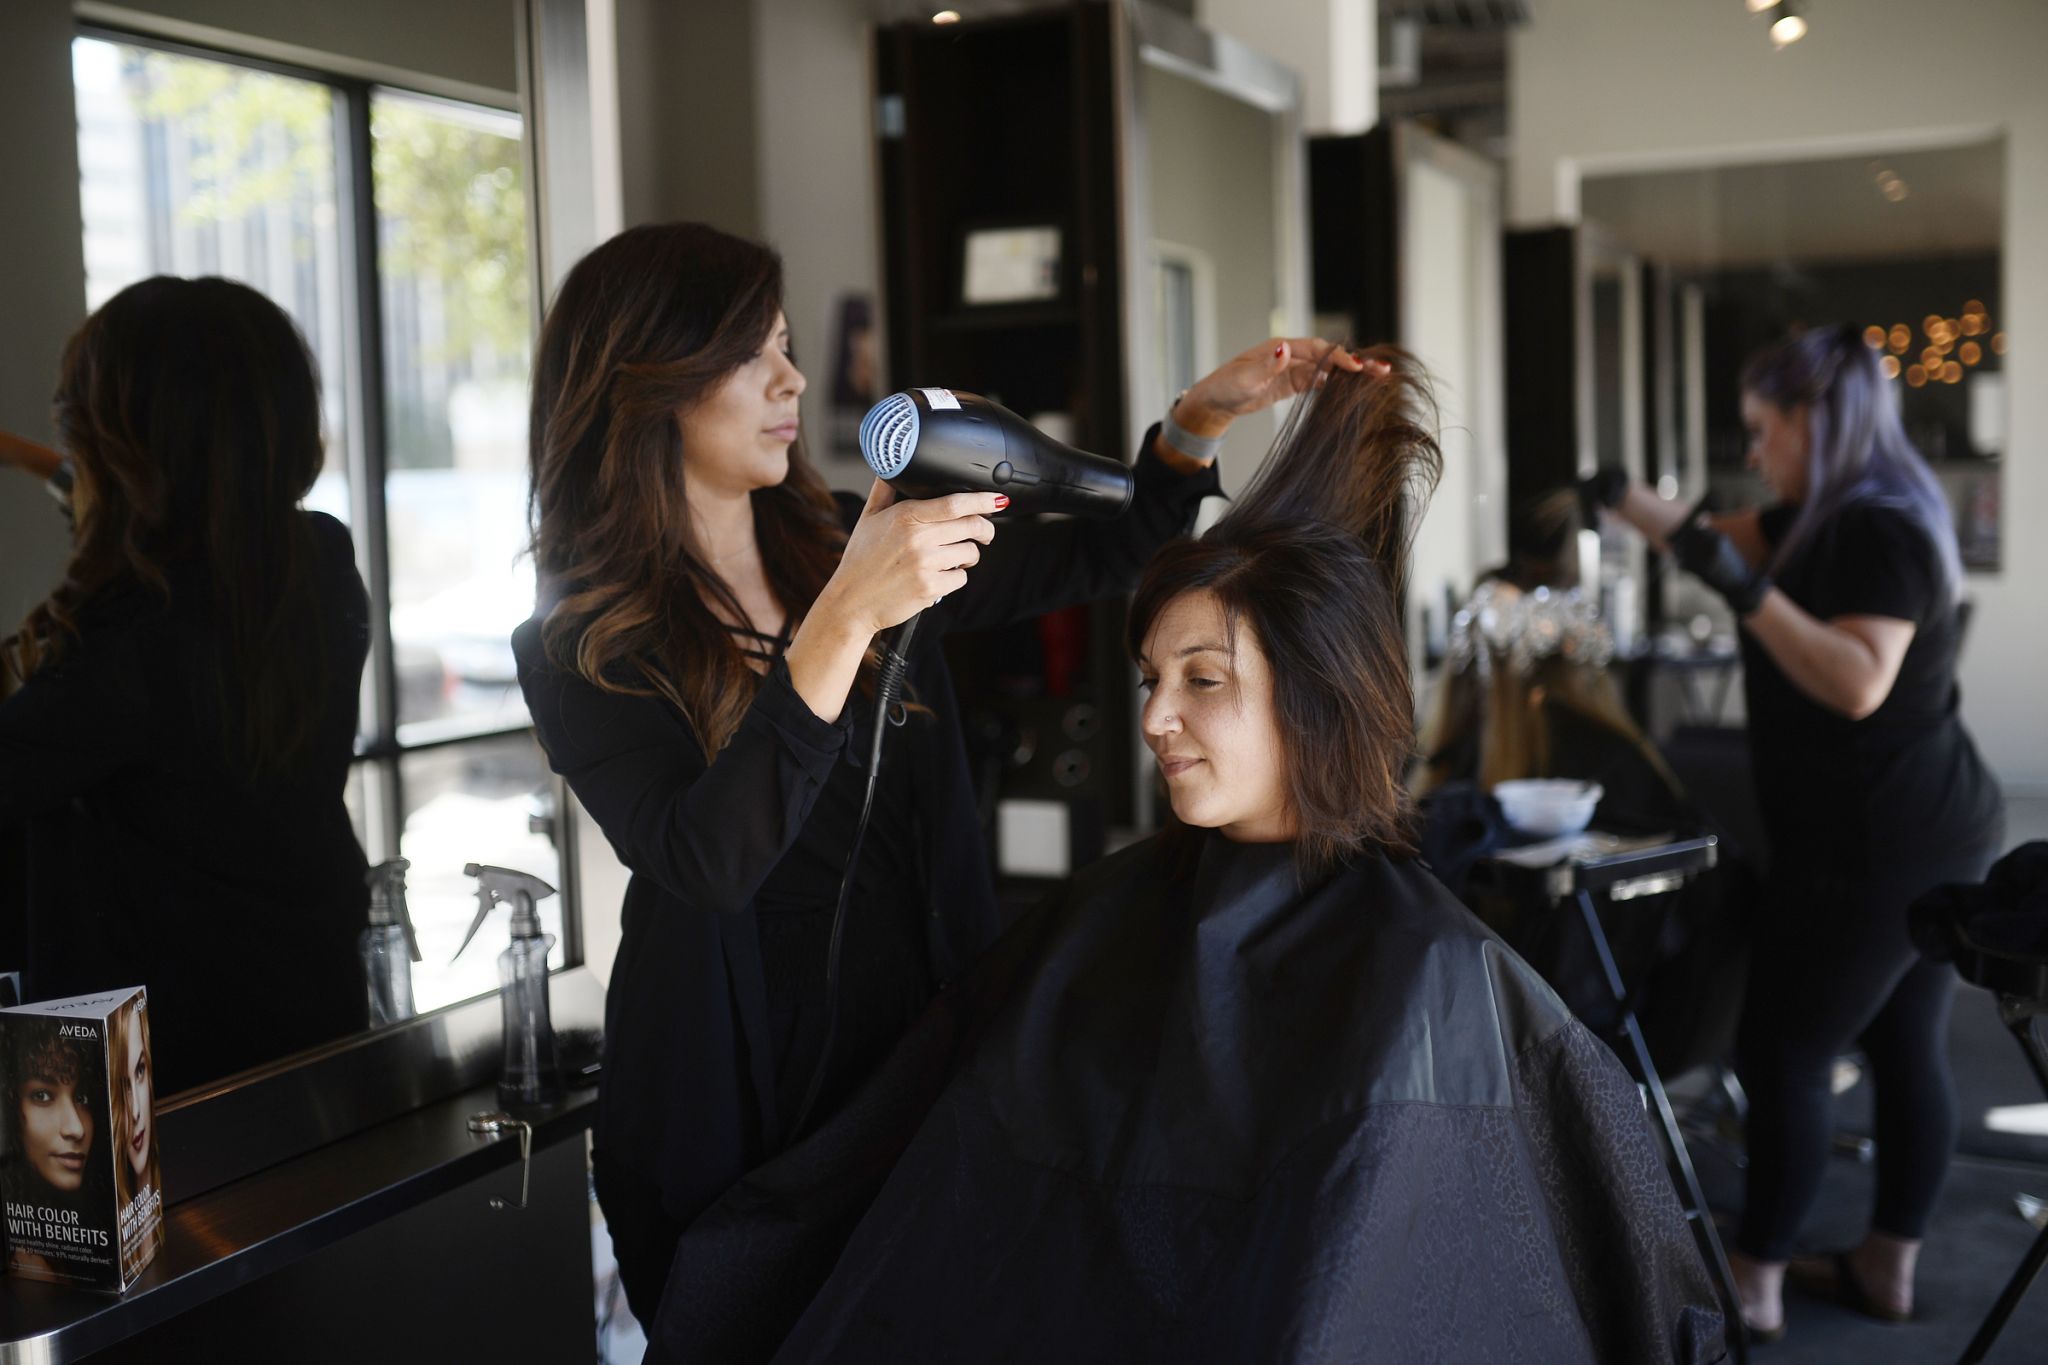 Halo owner wants hair salon to make a statement